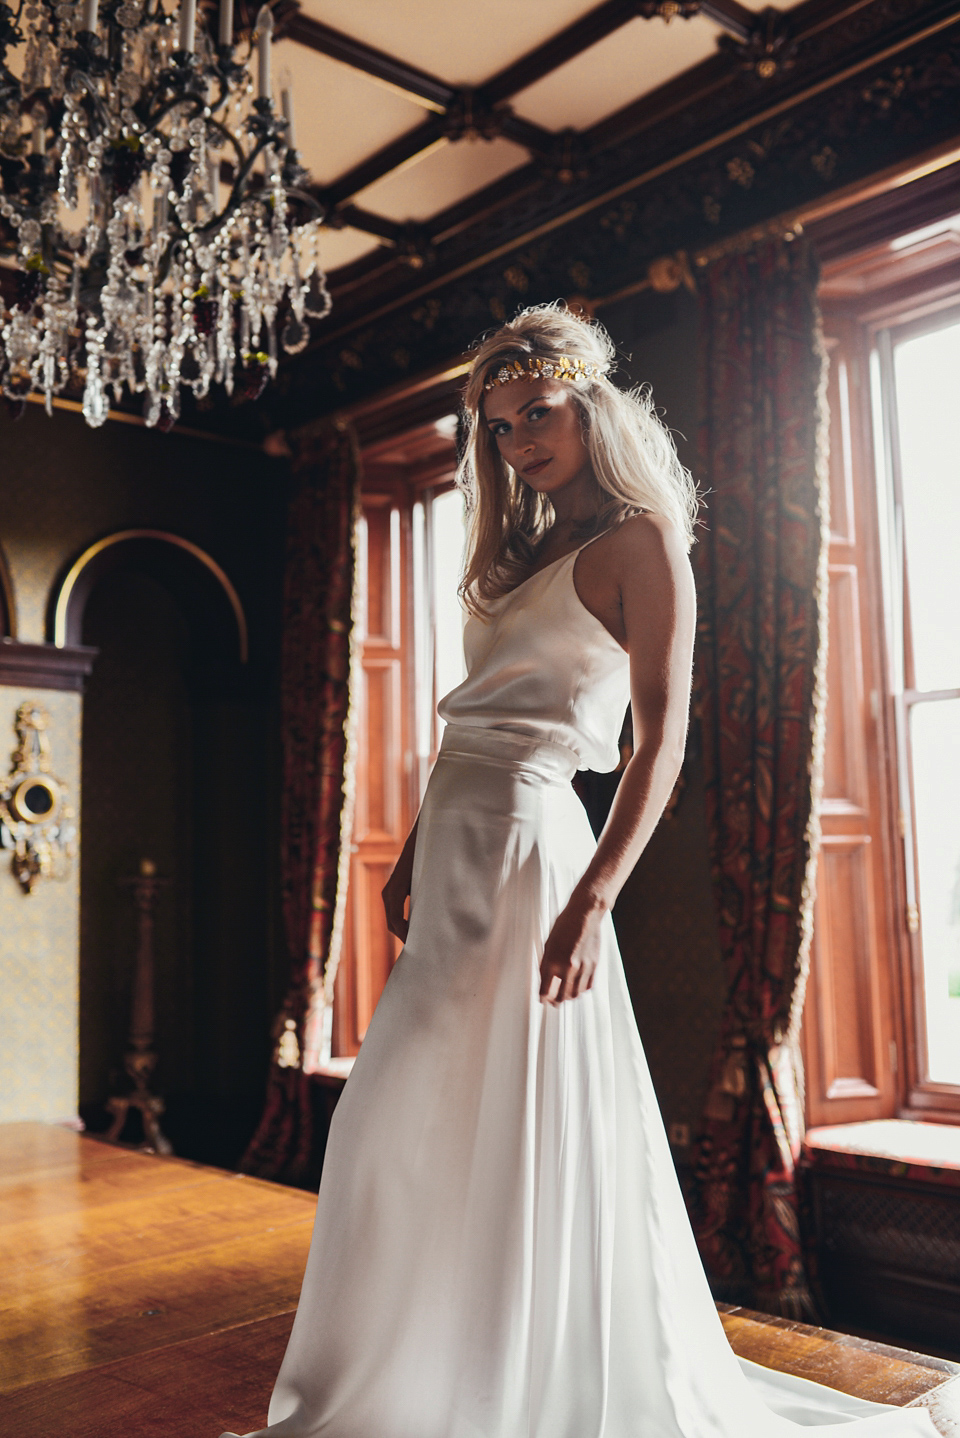 A bridal fashion shoot celebrating the bohemian bride and working with deep, dark shades of winter glamour. Photograph by Tara Florence.